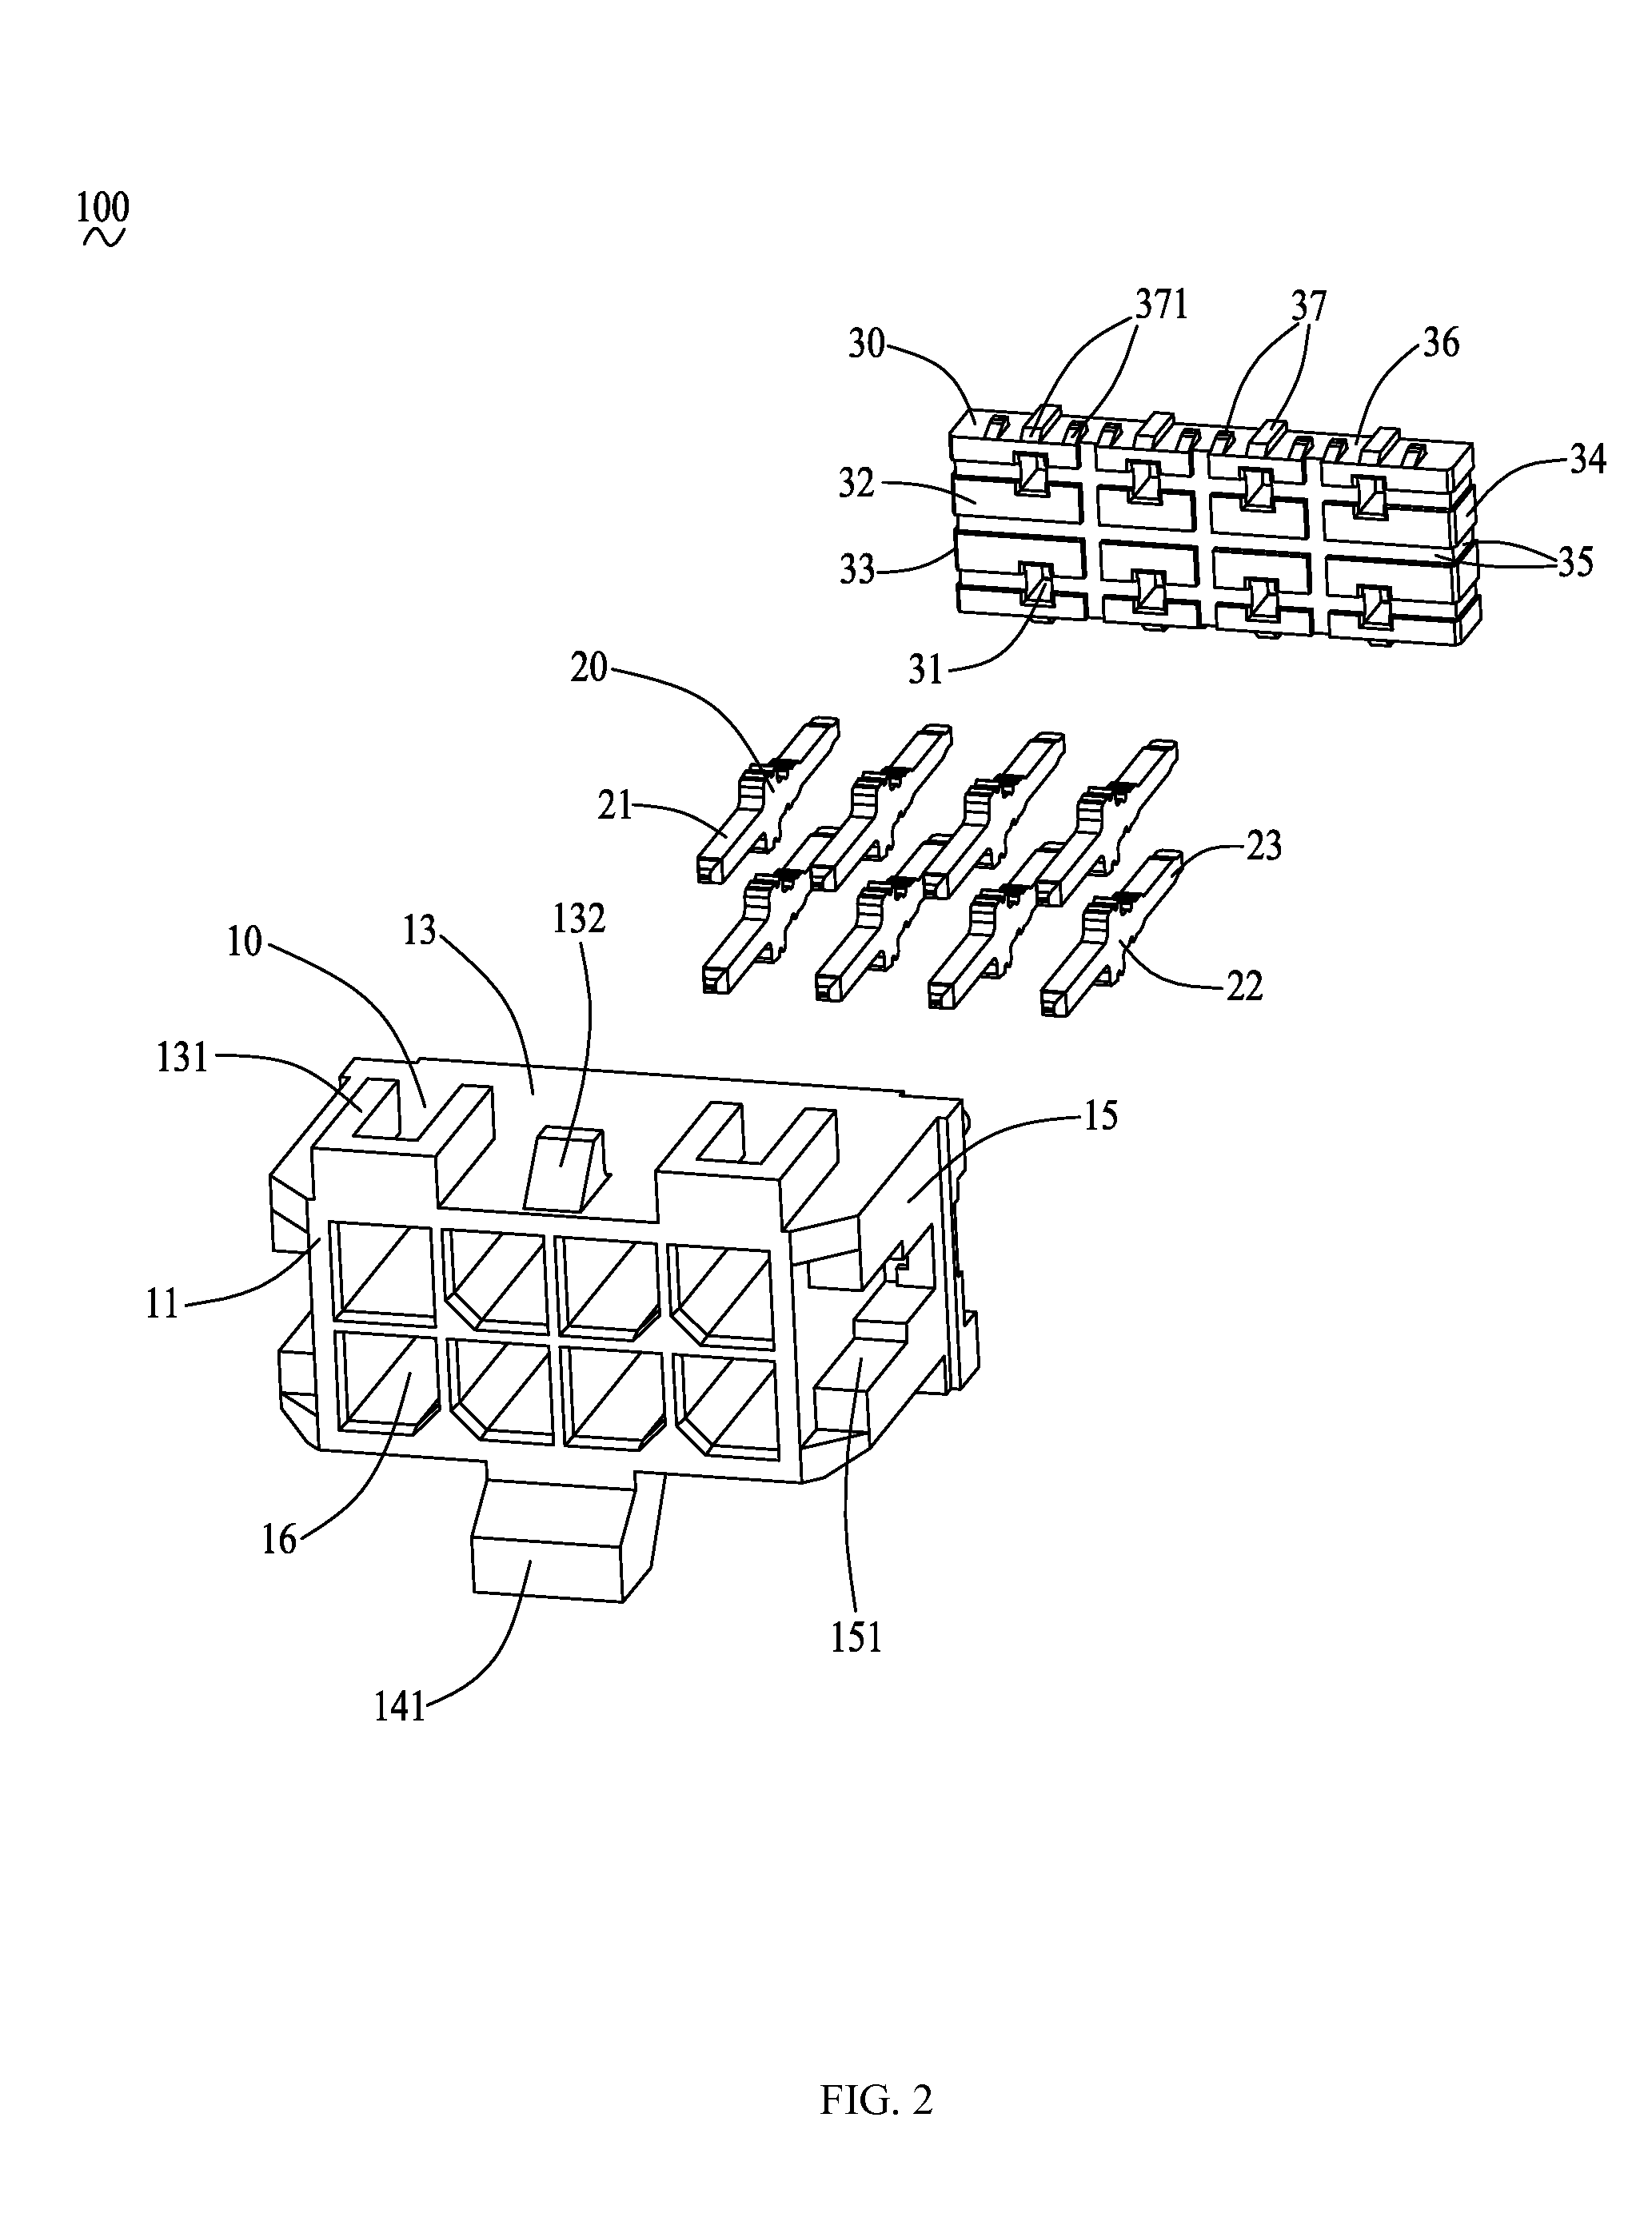 Receptacle connector with high retention force